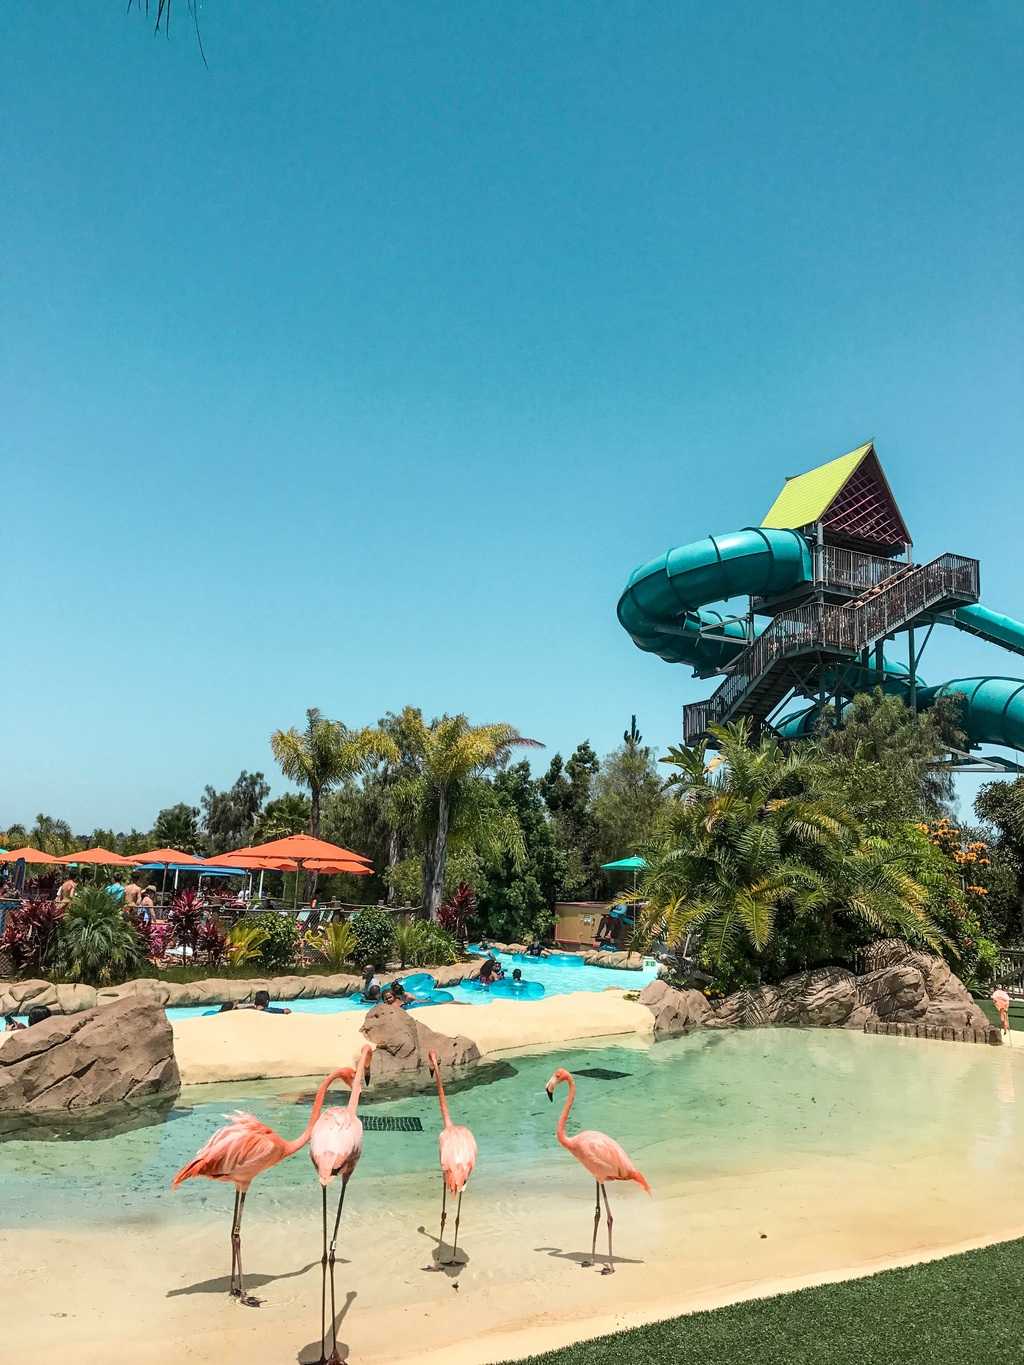 Are you looking for a fun place to cool off and beat the heat in Southern California? Check out Aquatica San Diego which has over a dozen water slides that appeal to all different ages and thrill-seekers. They even have live flamingo and sea turtle encounters!